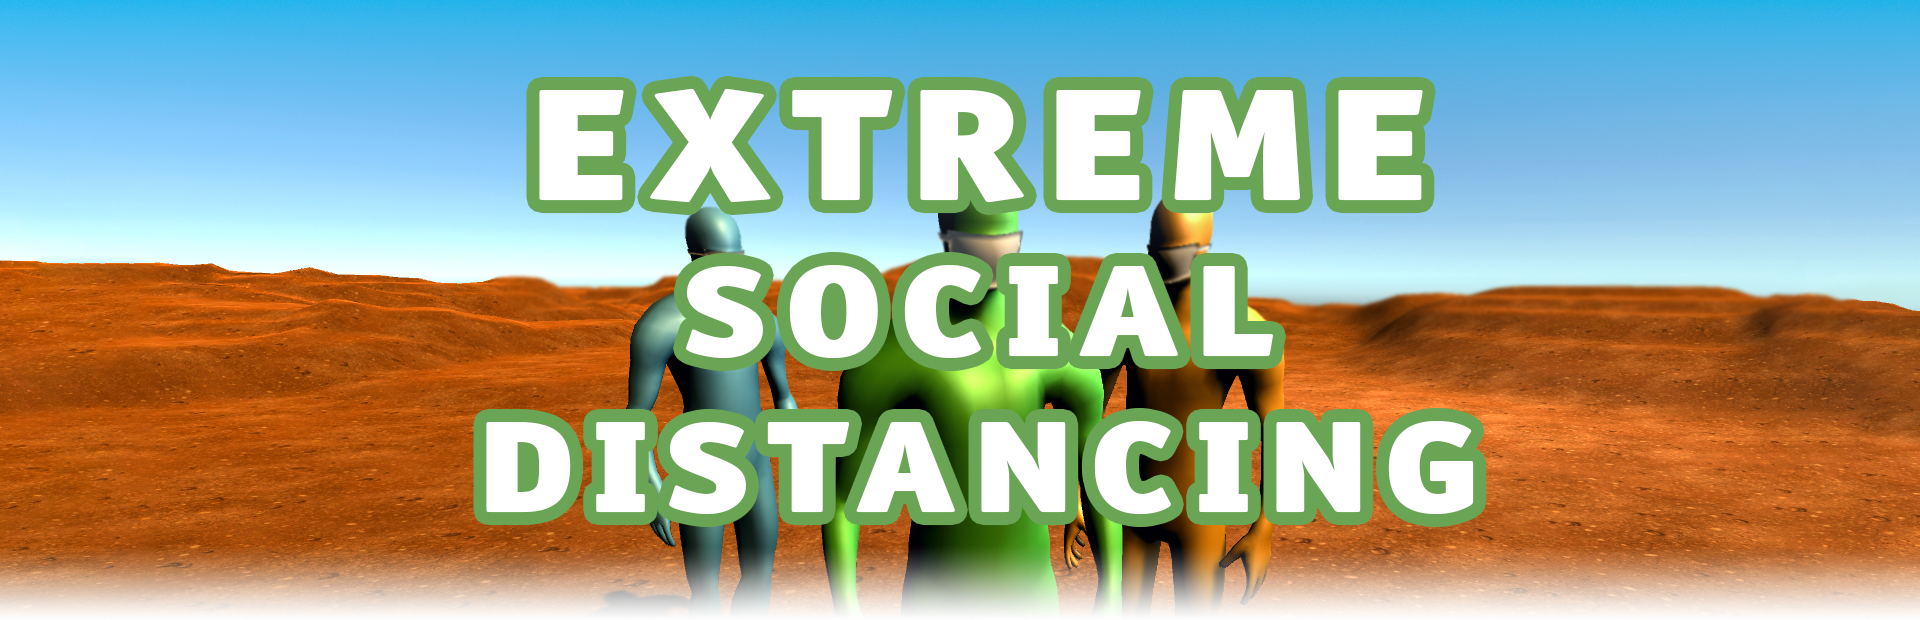 Extreme Social Distancing